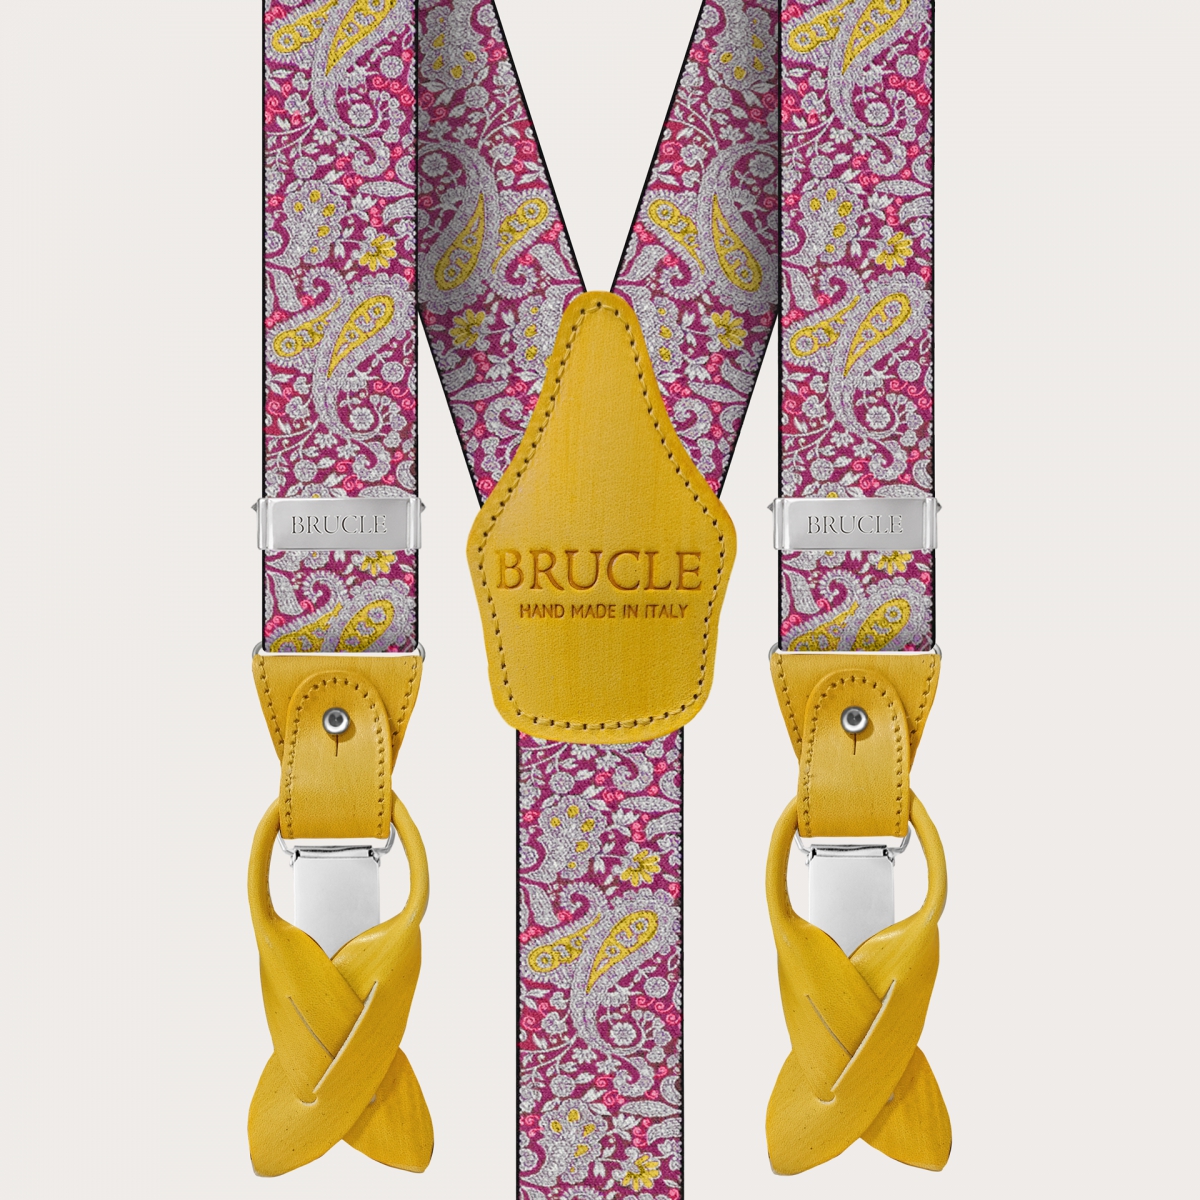 BRUCLE Double use suspenders in cashmere, magenta and yellow pattern